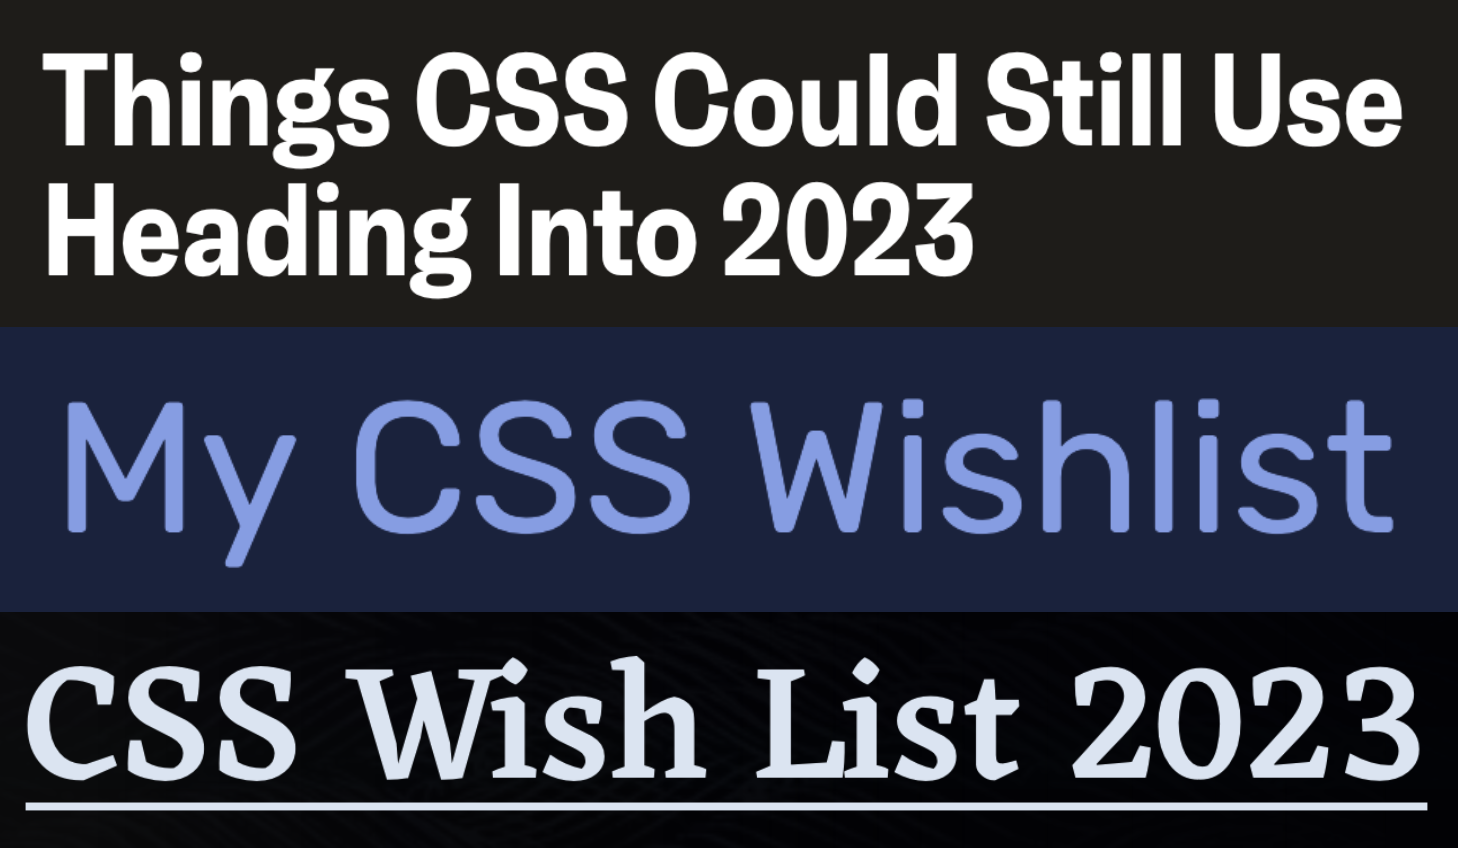 Things CSS Could Still Use Heading Into 2023, My CSS Wishlist, CSS Wish List 2023